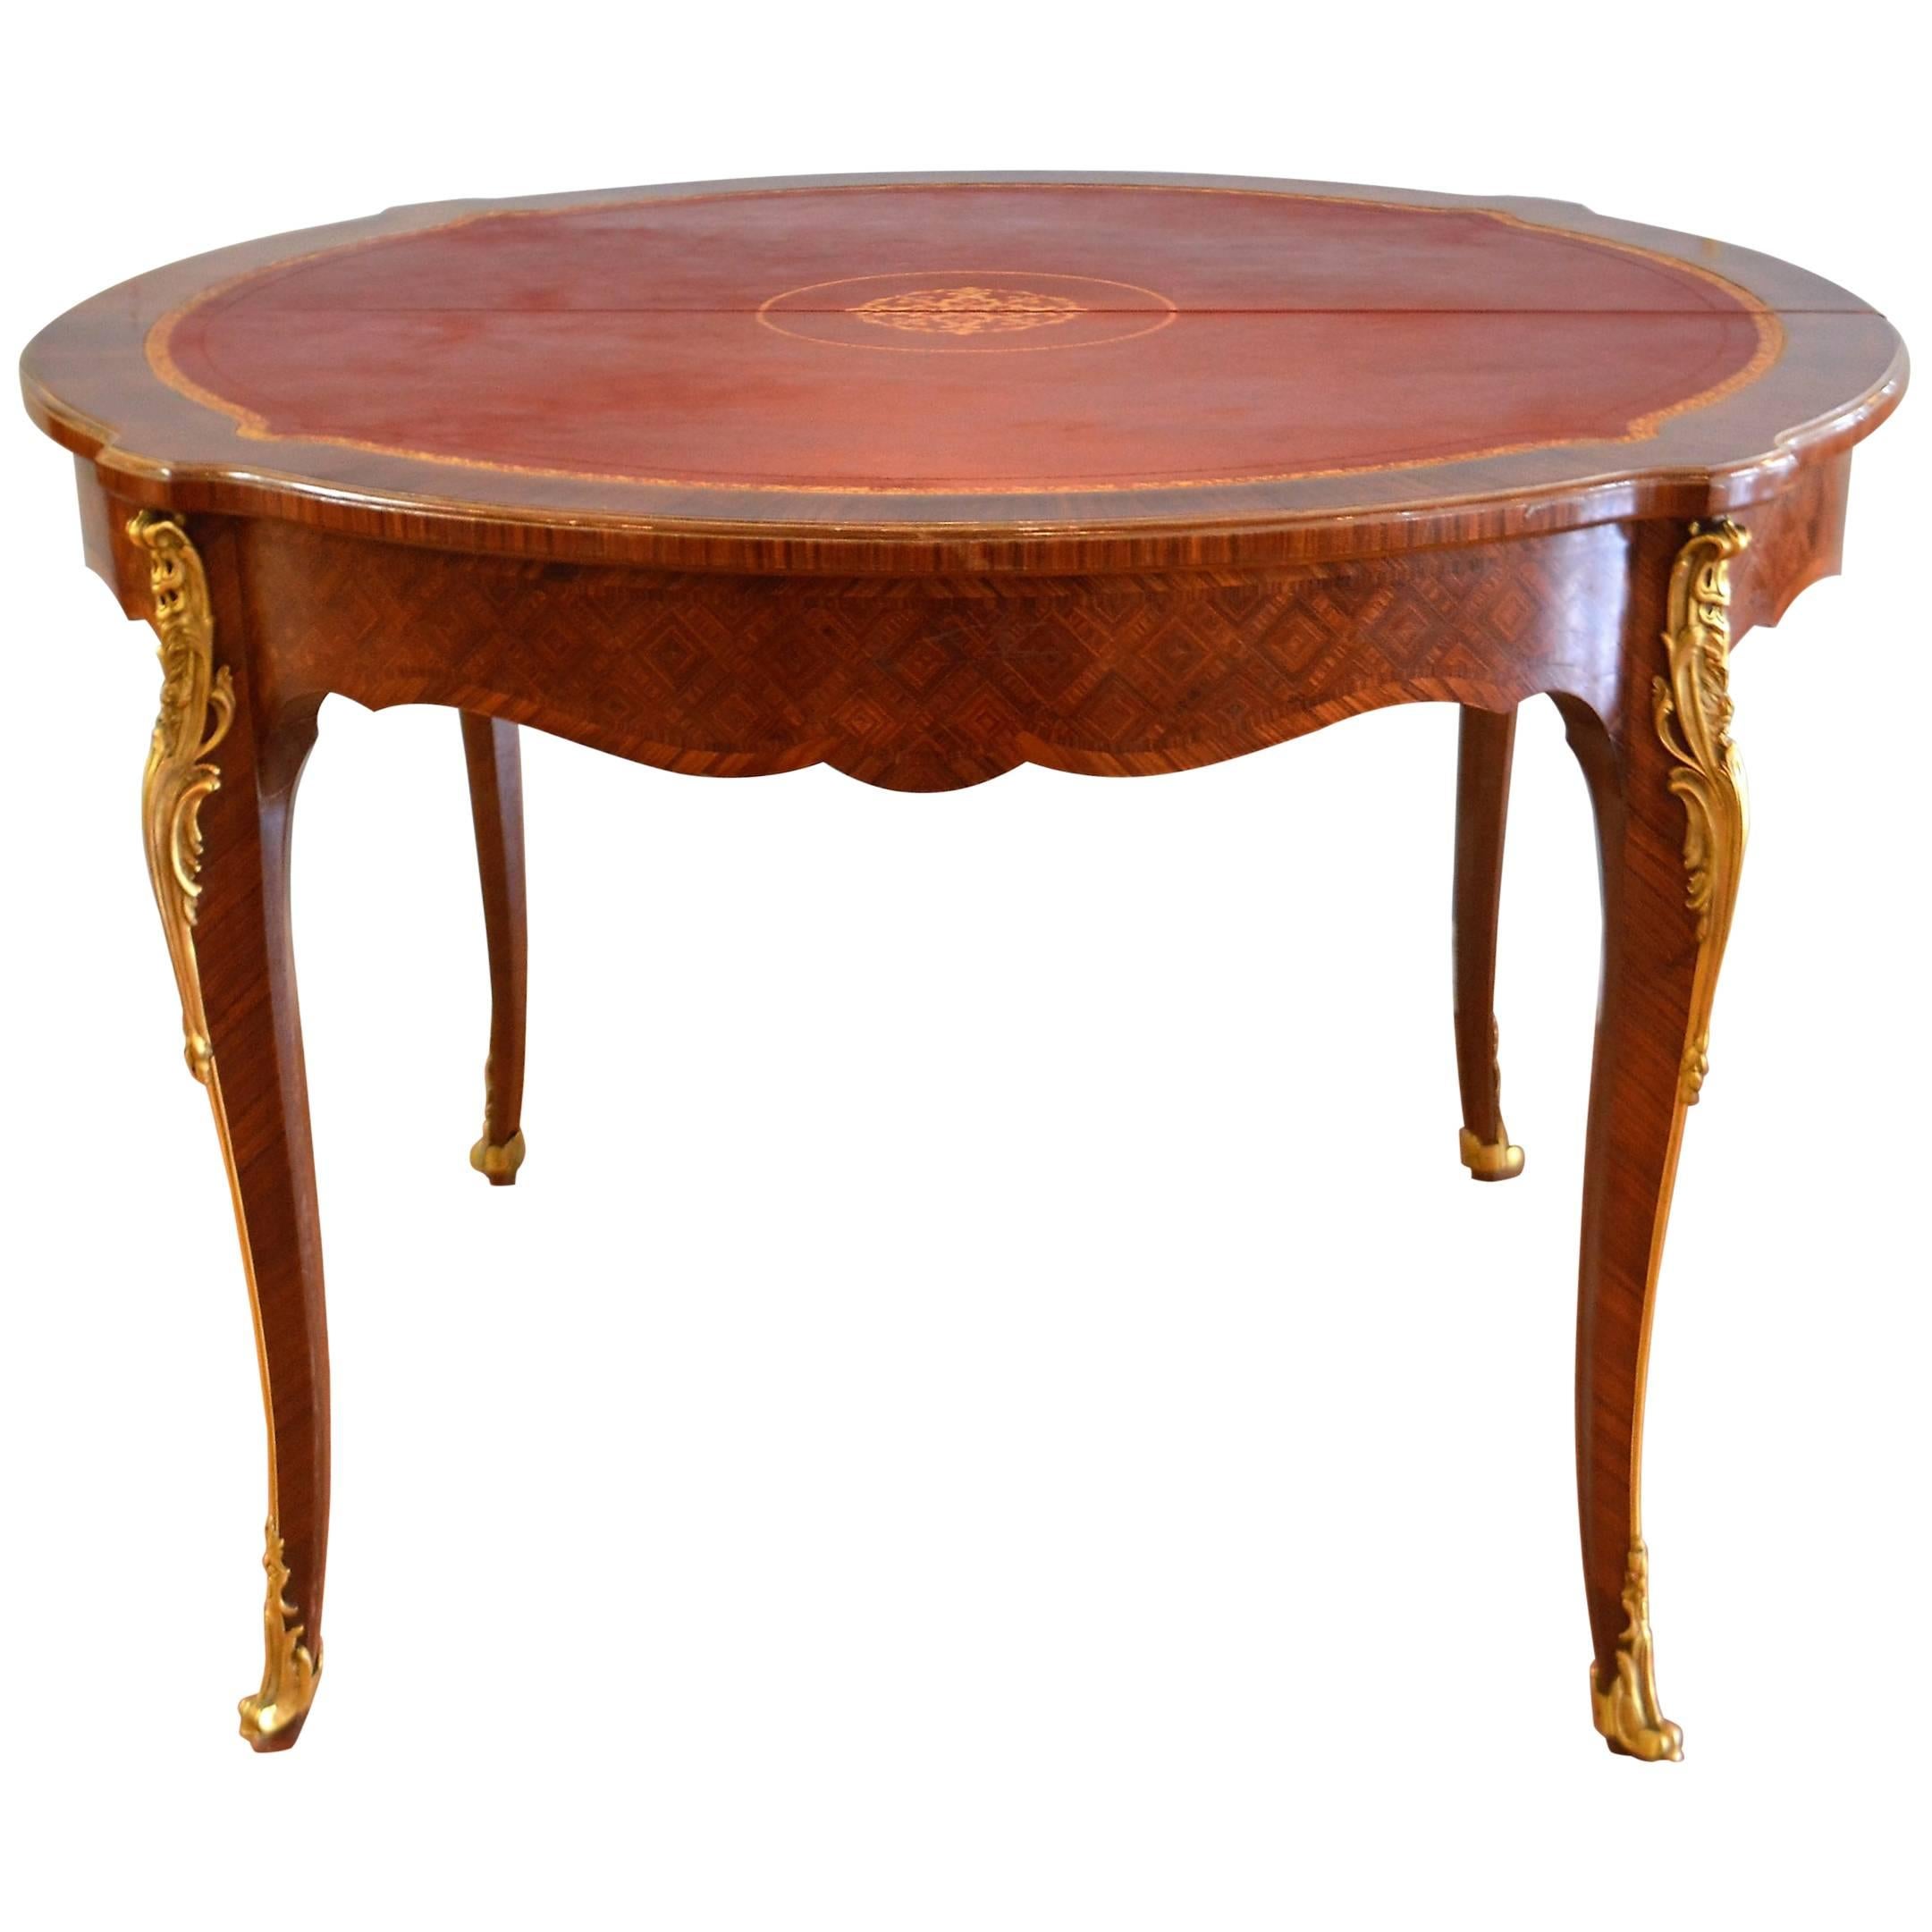 Louis XV Style Round Games Table with Bronze Details and Leather Top